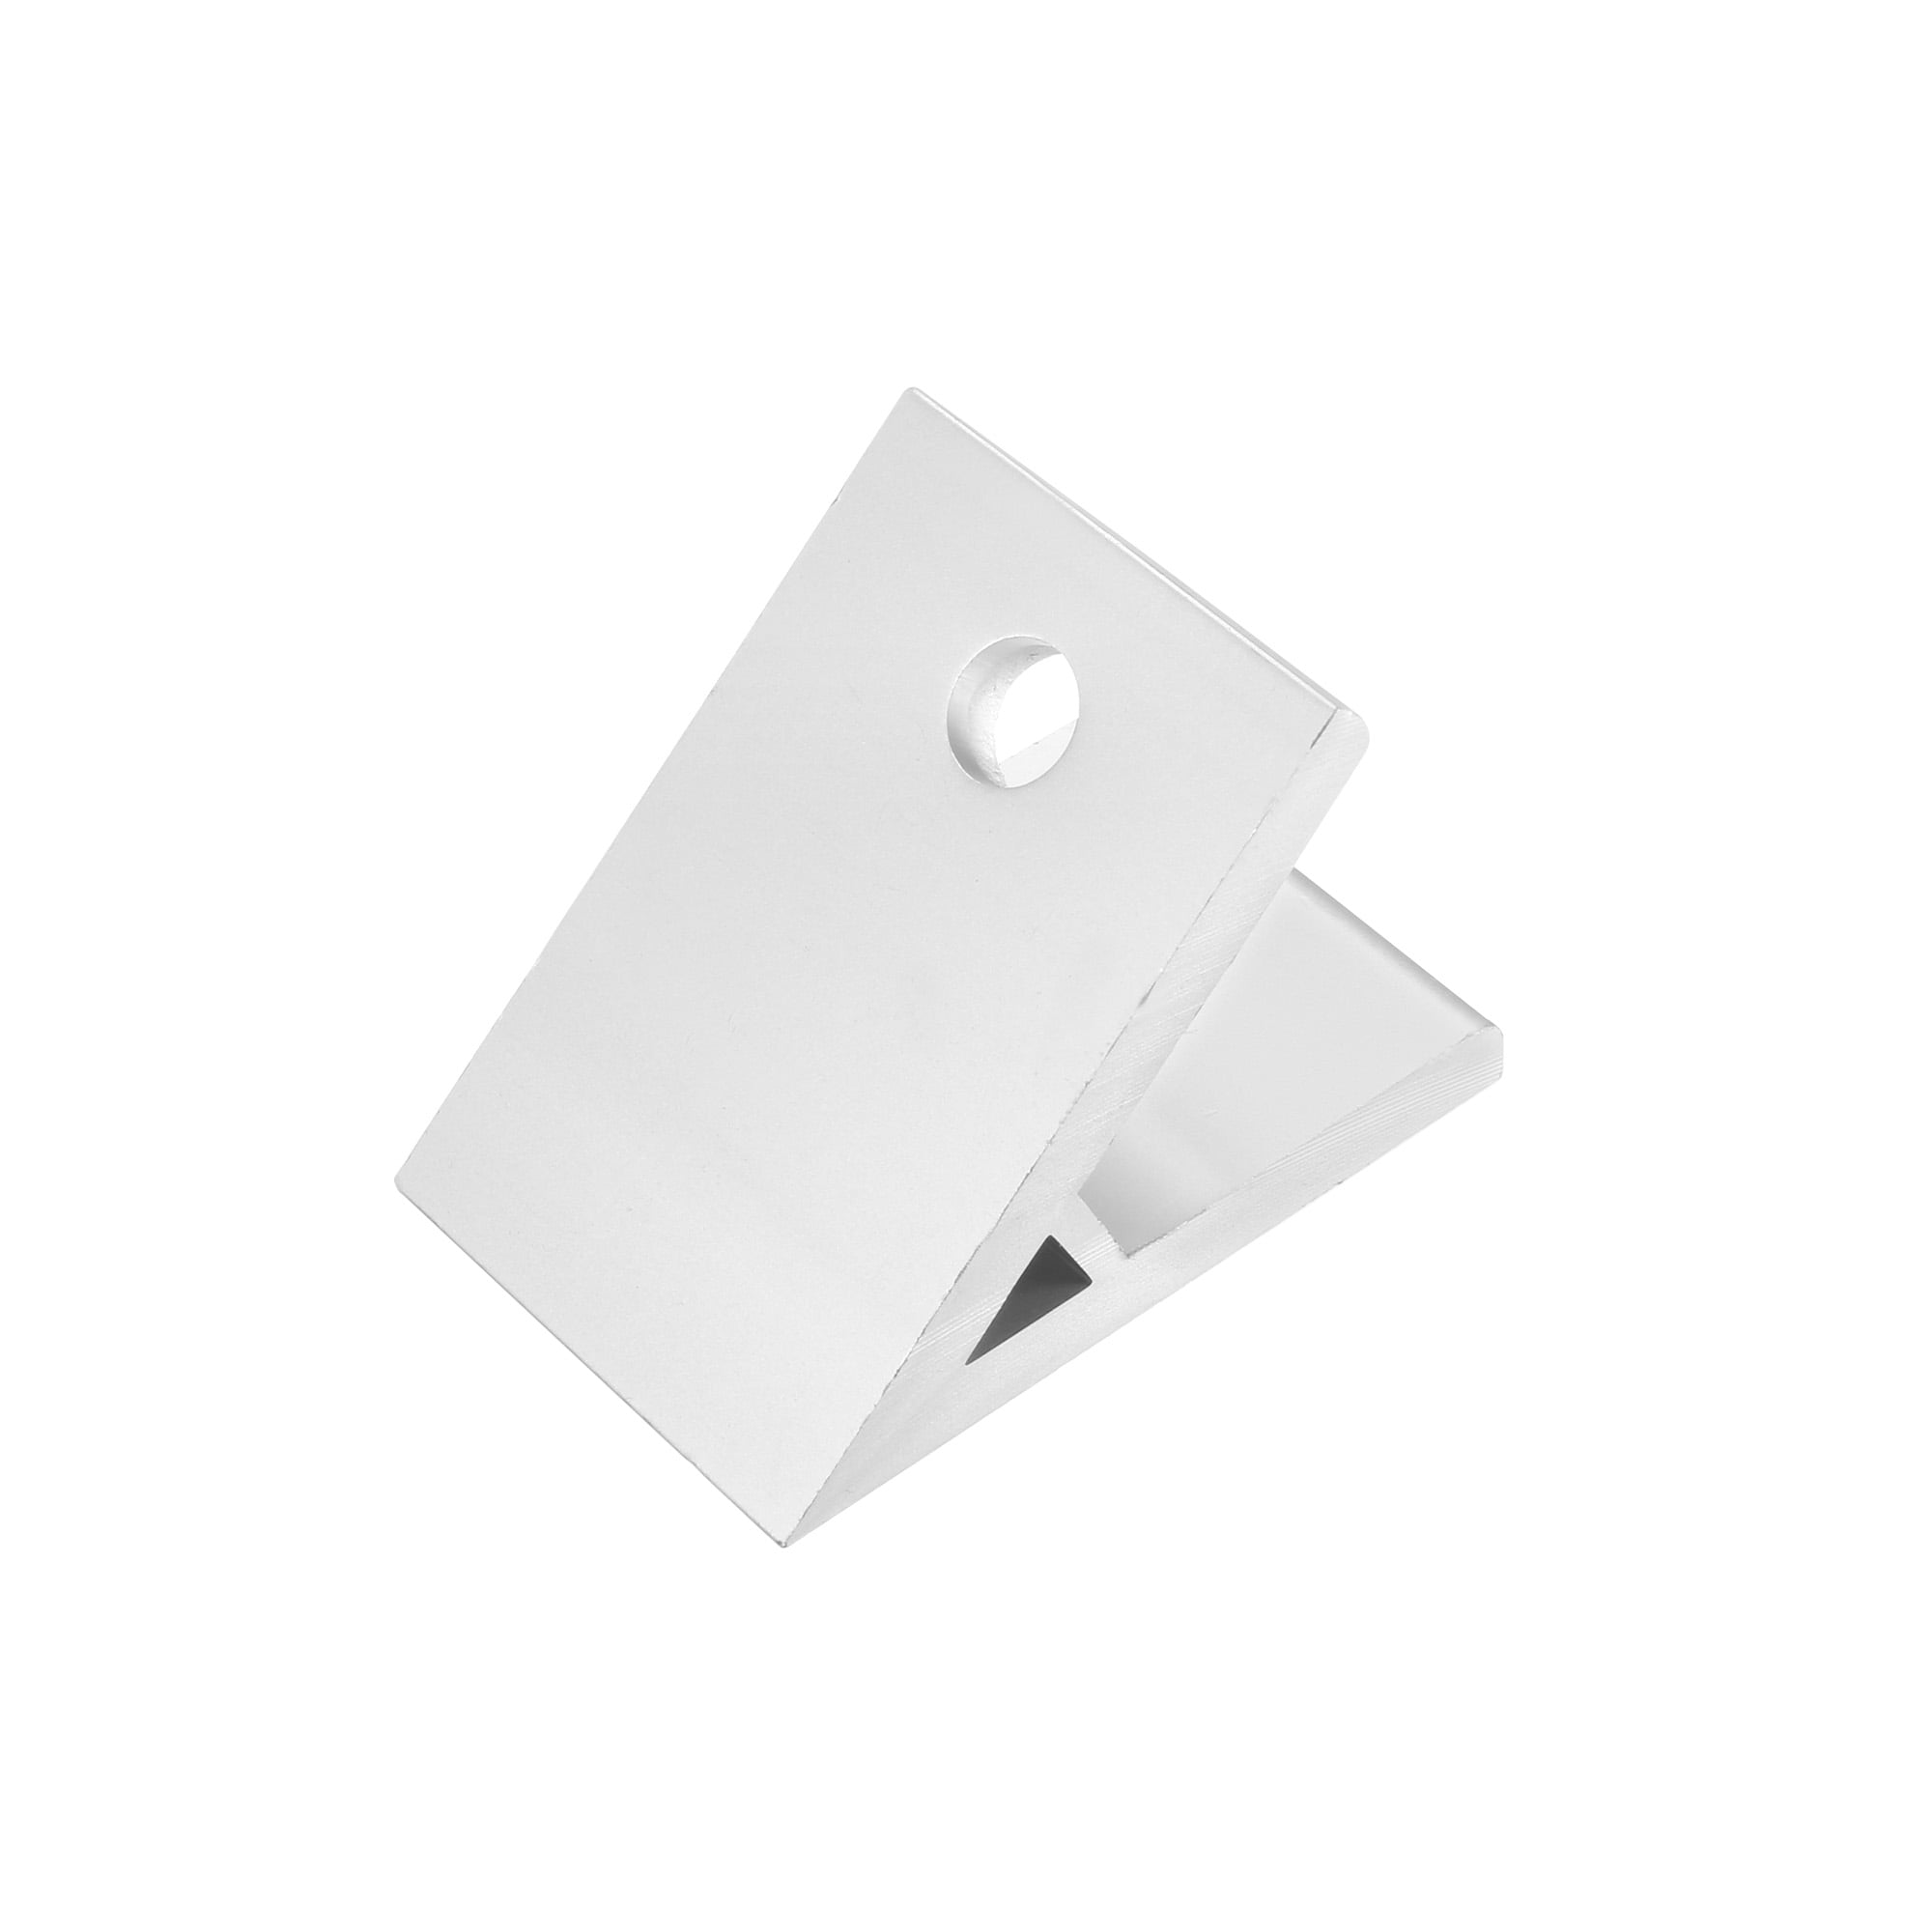 5X 4040 Corner Fitting Angle Connector Bracket for Aluminum Profile